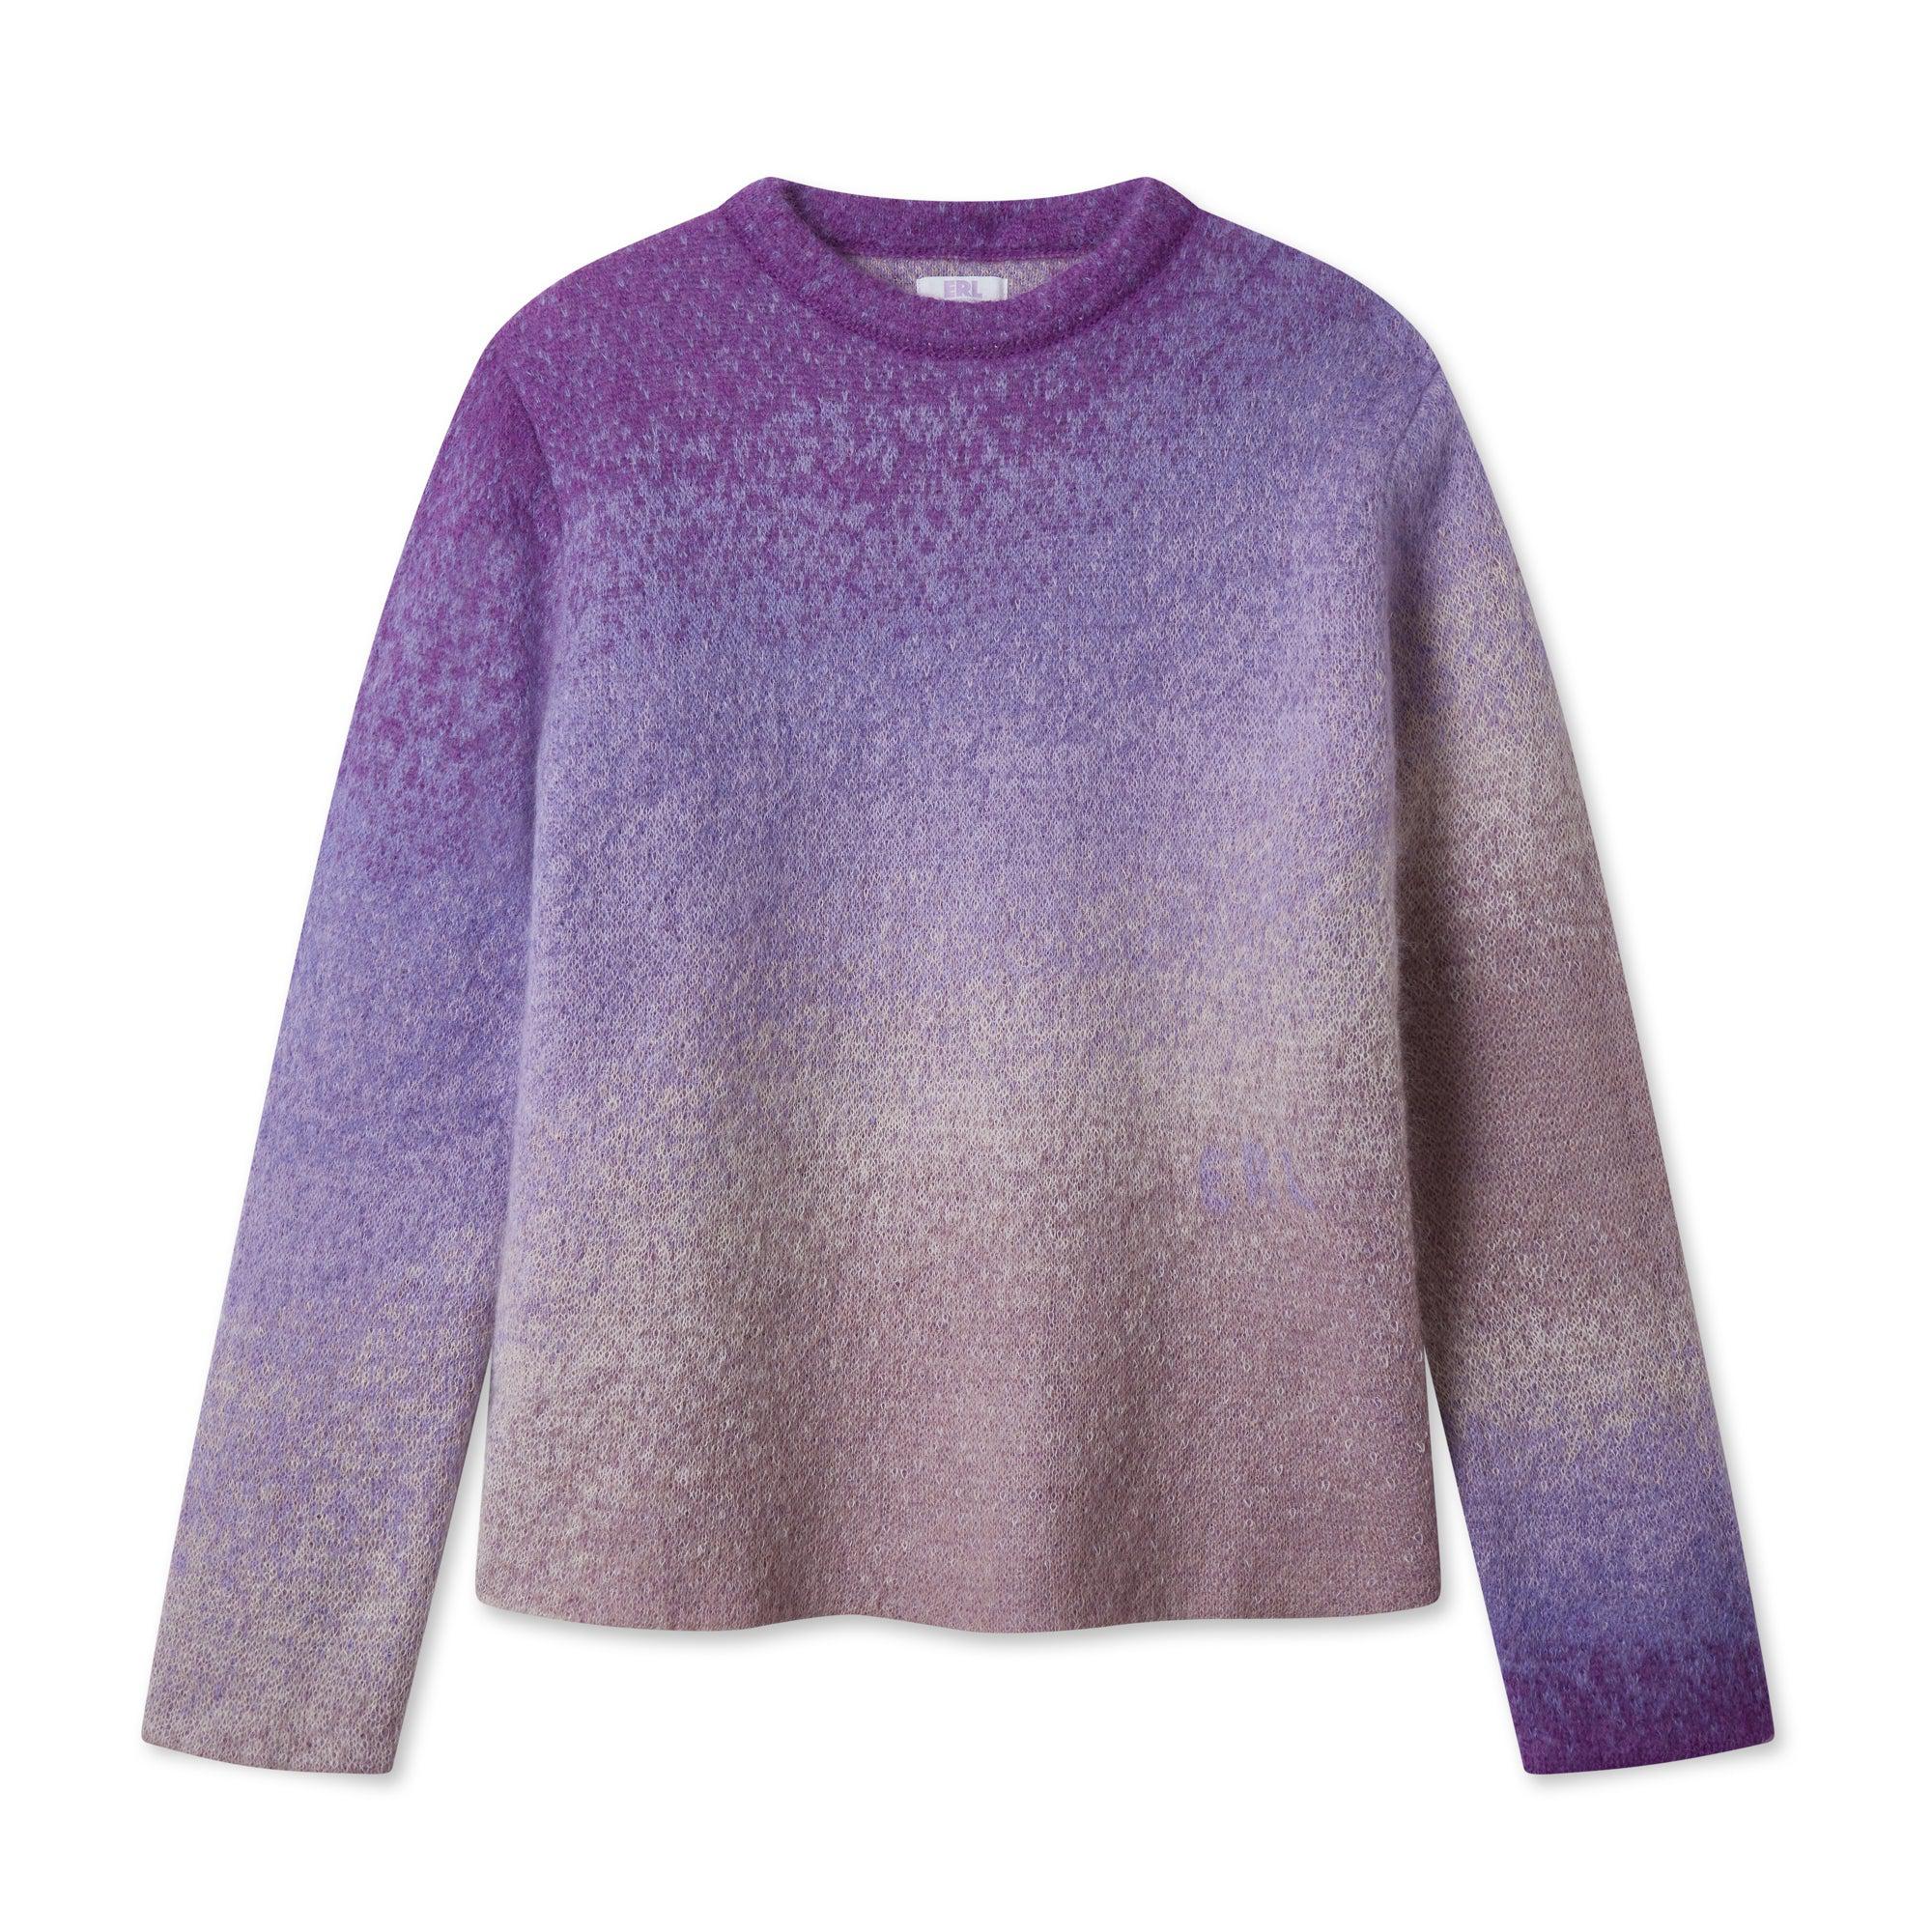 ERL Gradient Crew Neck Sweater (Purple) by ERL